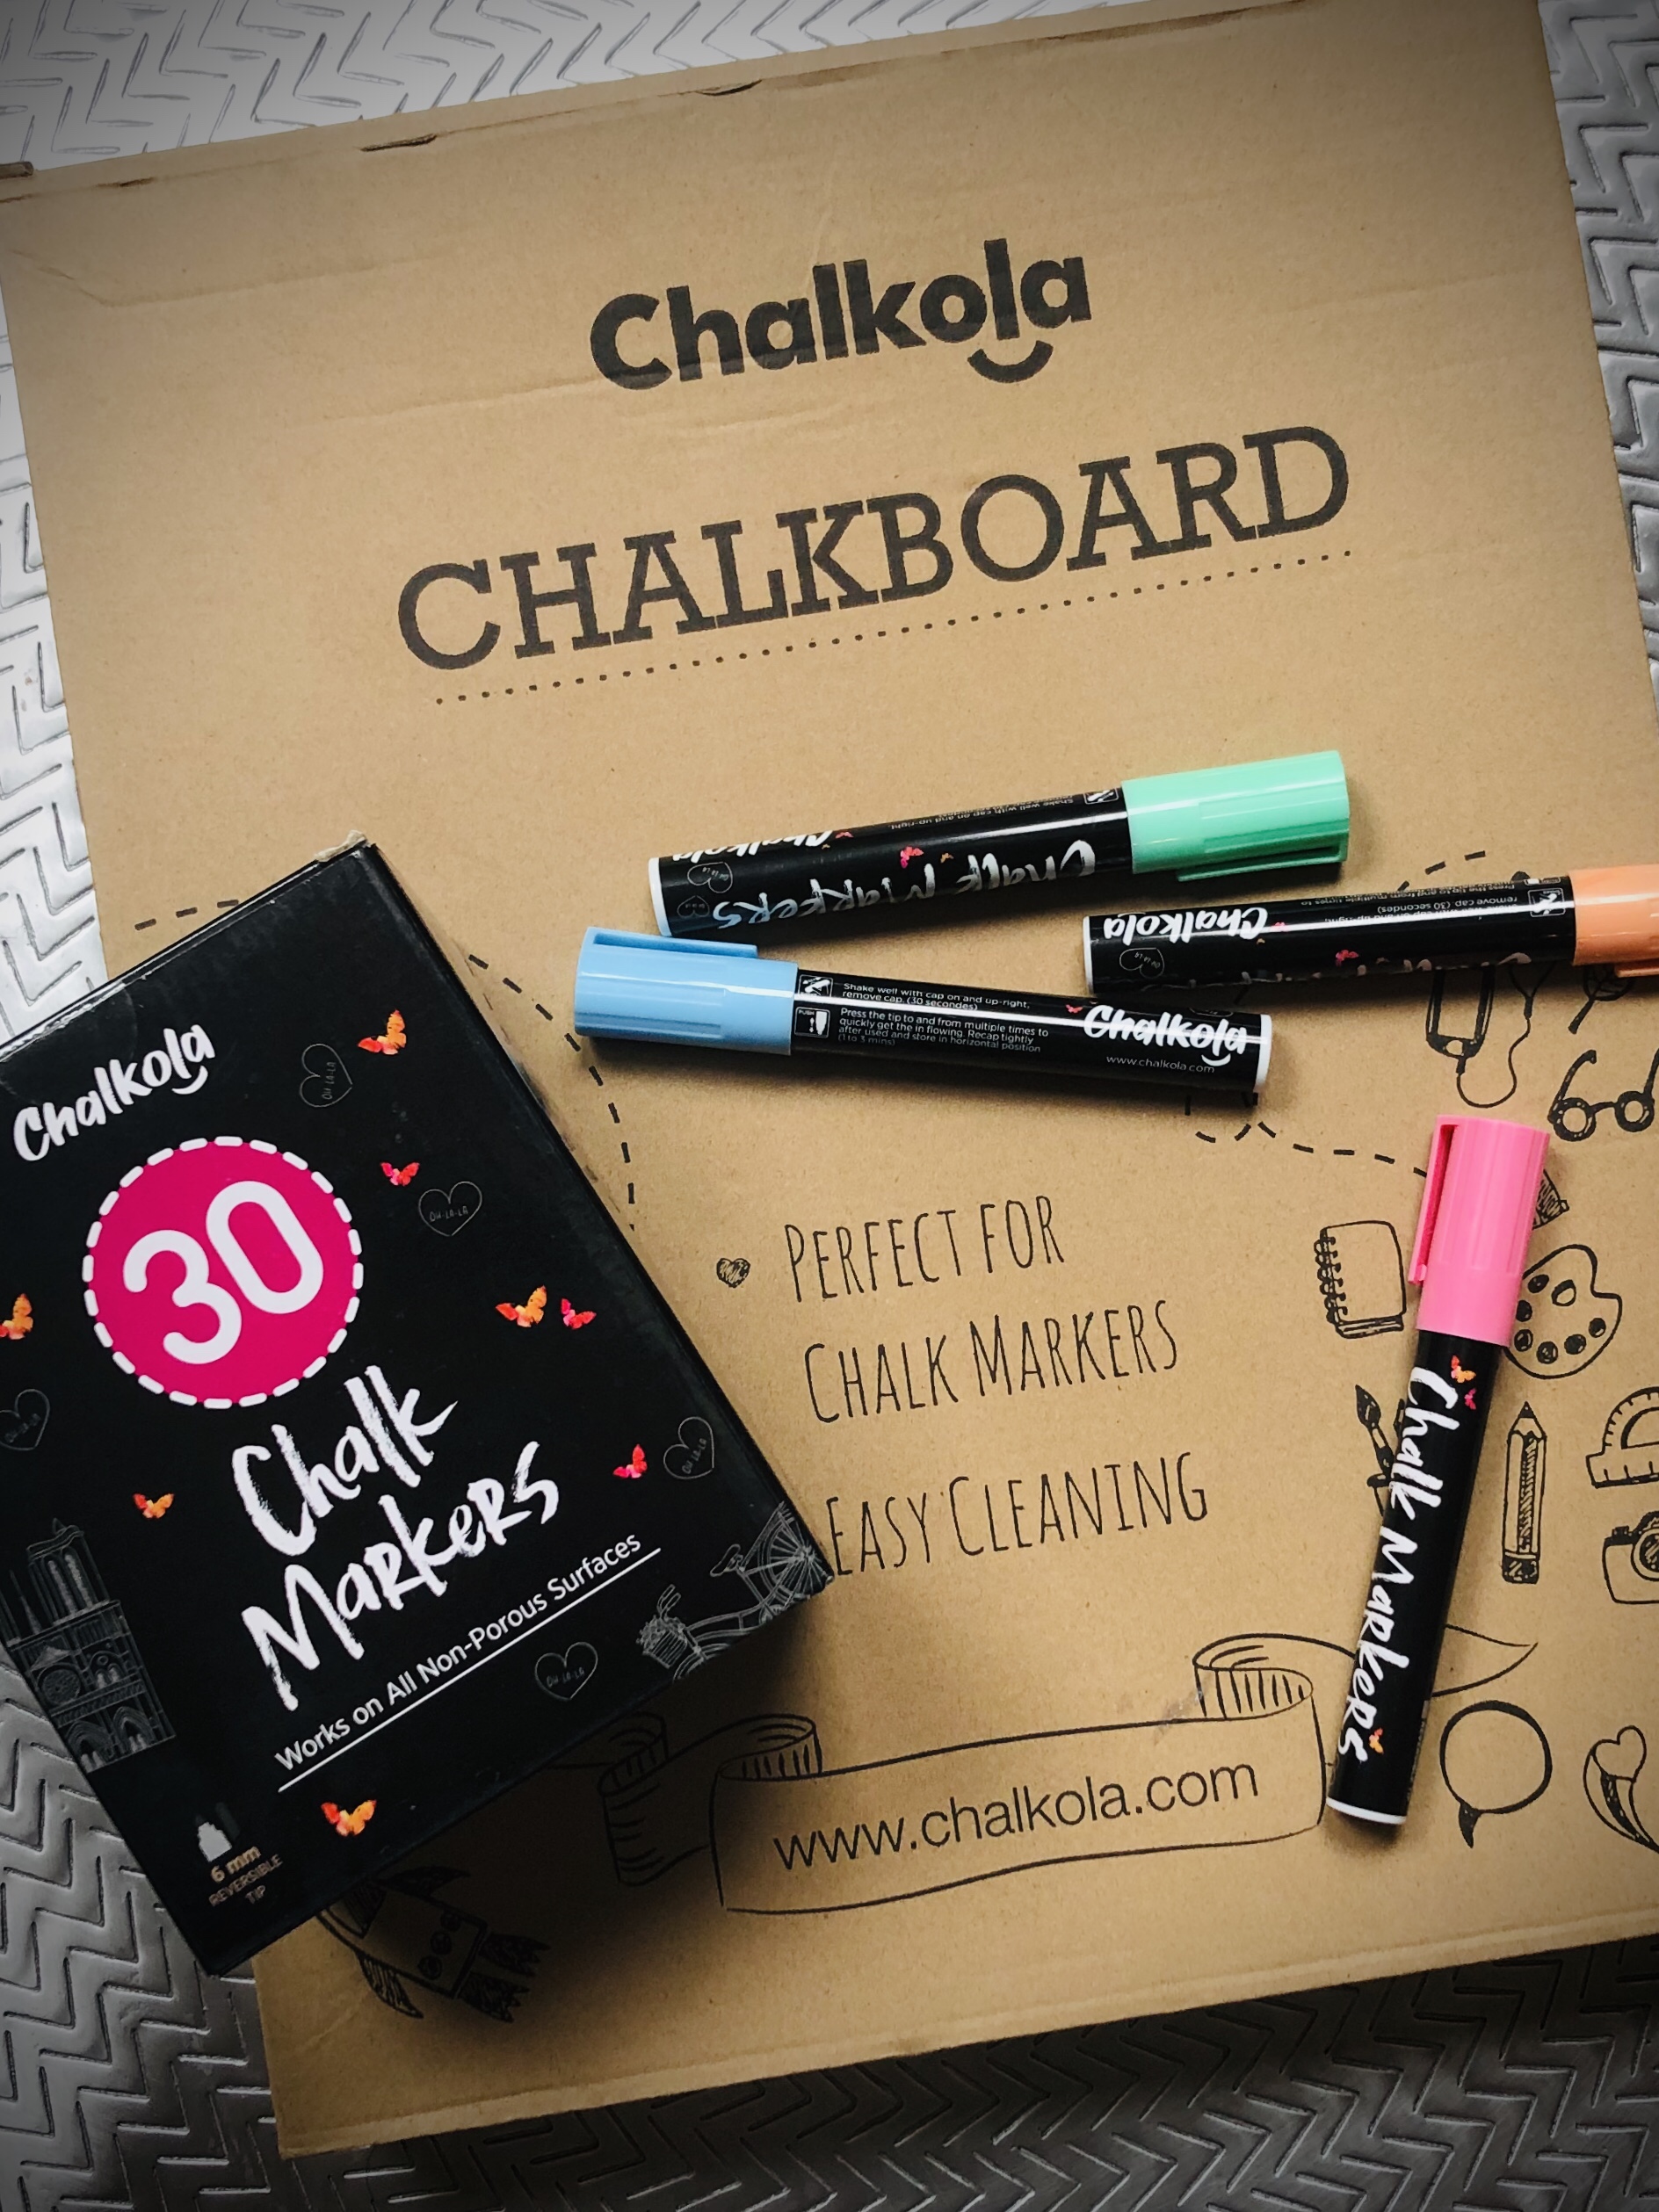 Chalk Lettering with Chalkola Chalk Markers